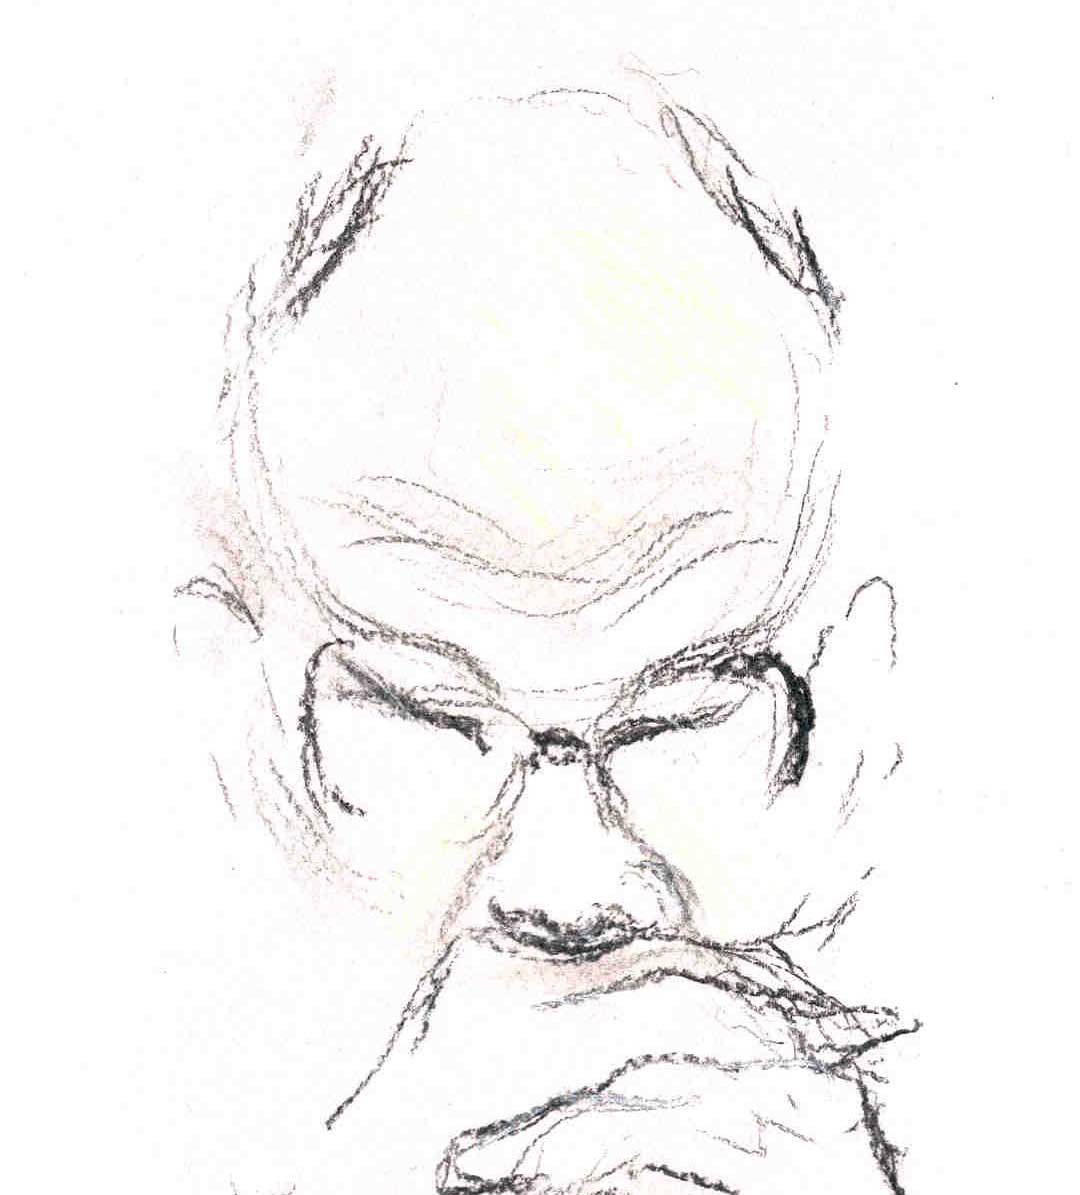 Lord Neuberger. Sketch by Isobel Williams http://isobelwilliams.blogspot.co.uk/